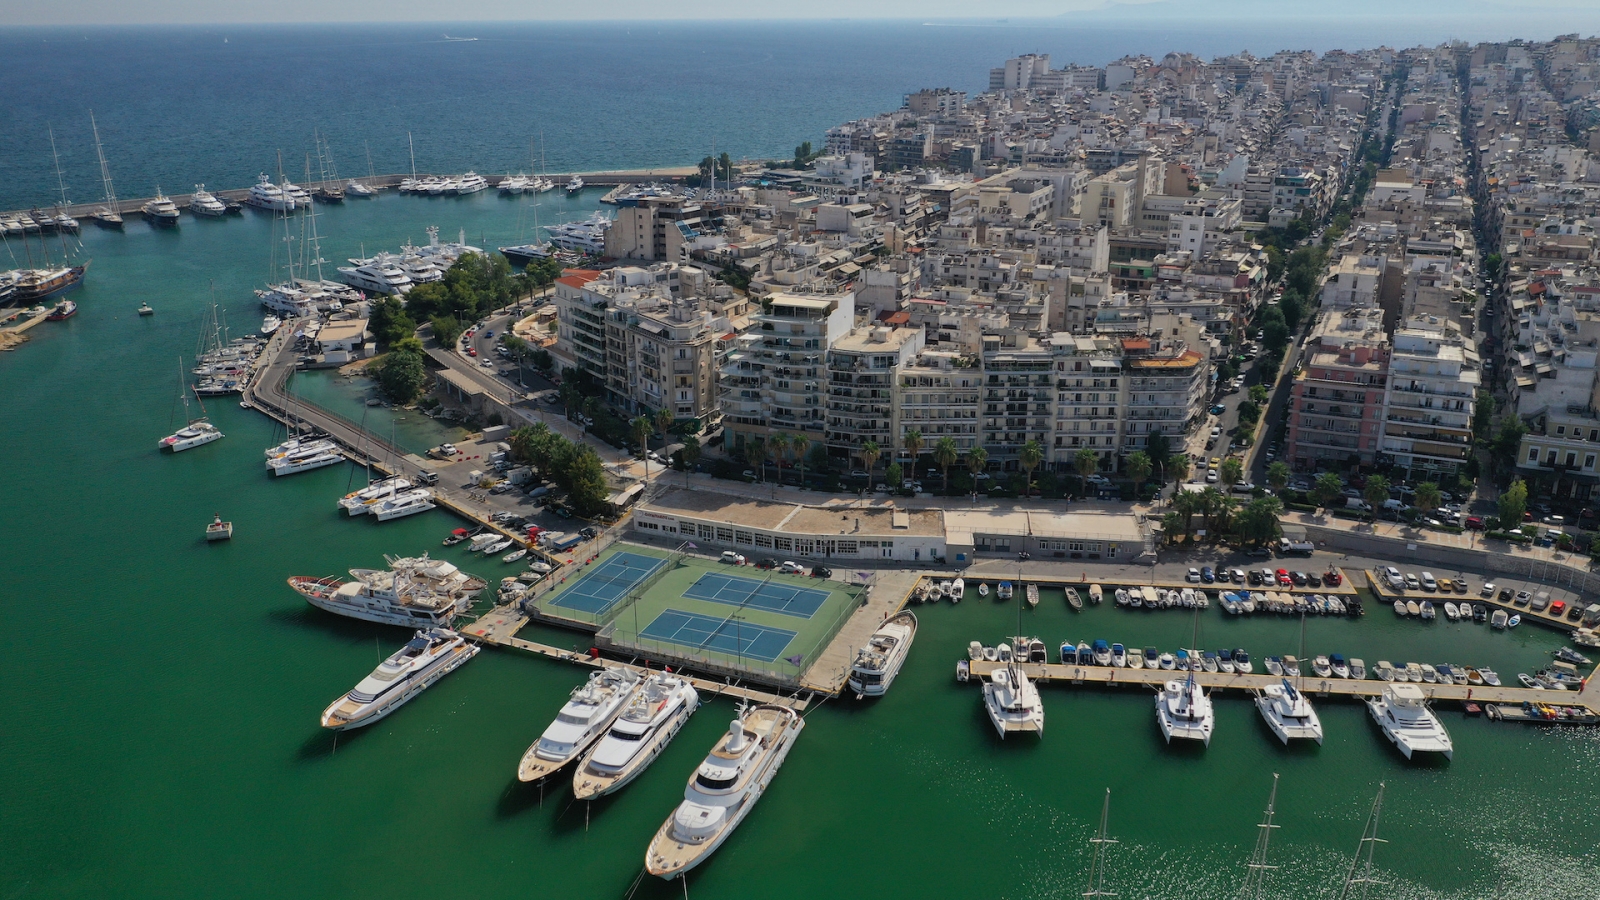 Aerial drone photo of famous port and Marina of Zea or Pasalimani in the heart of Piraeus, Attica, Greece